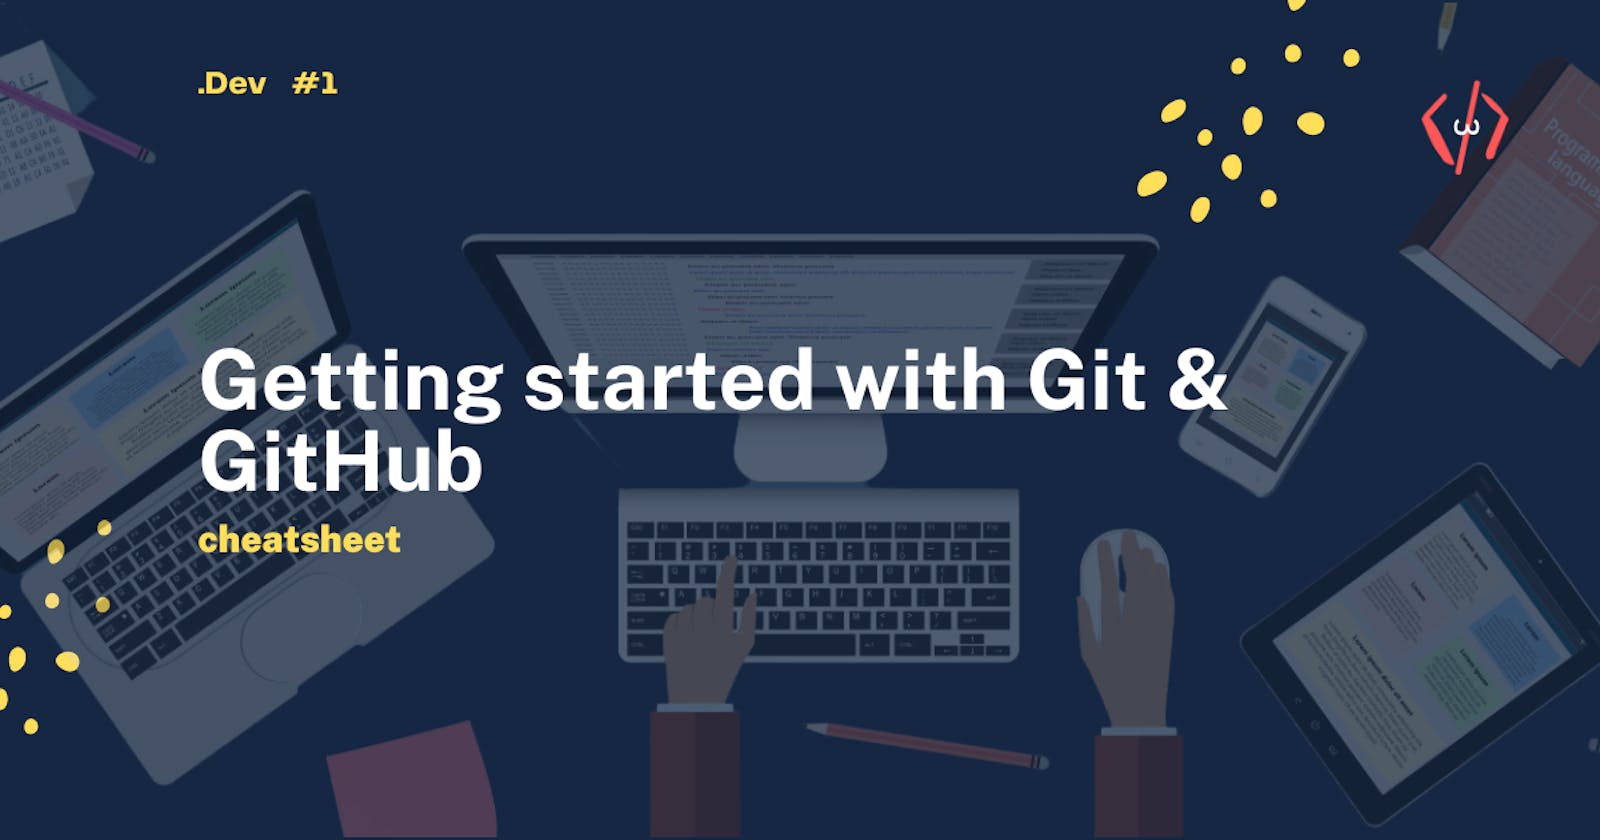 Getting started with Git & GitHub